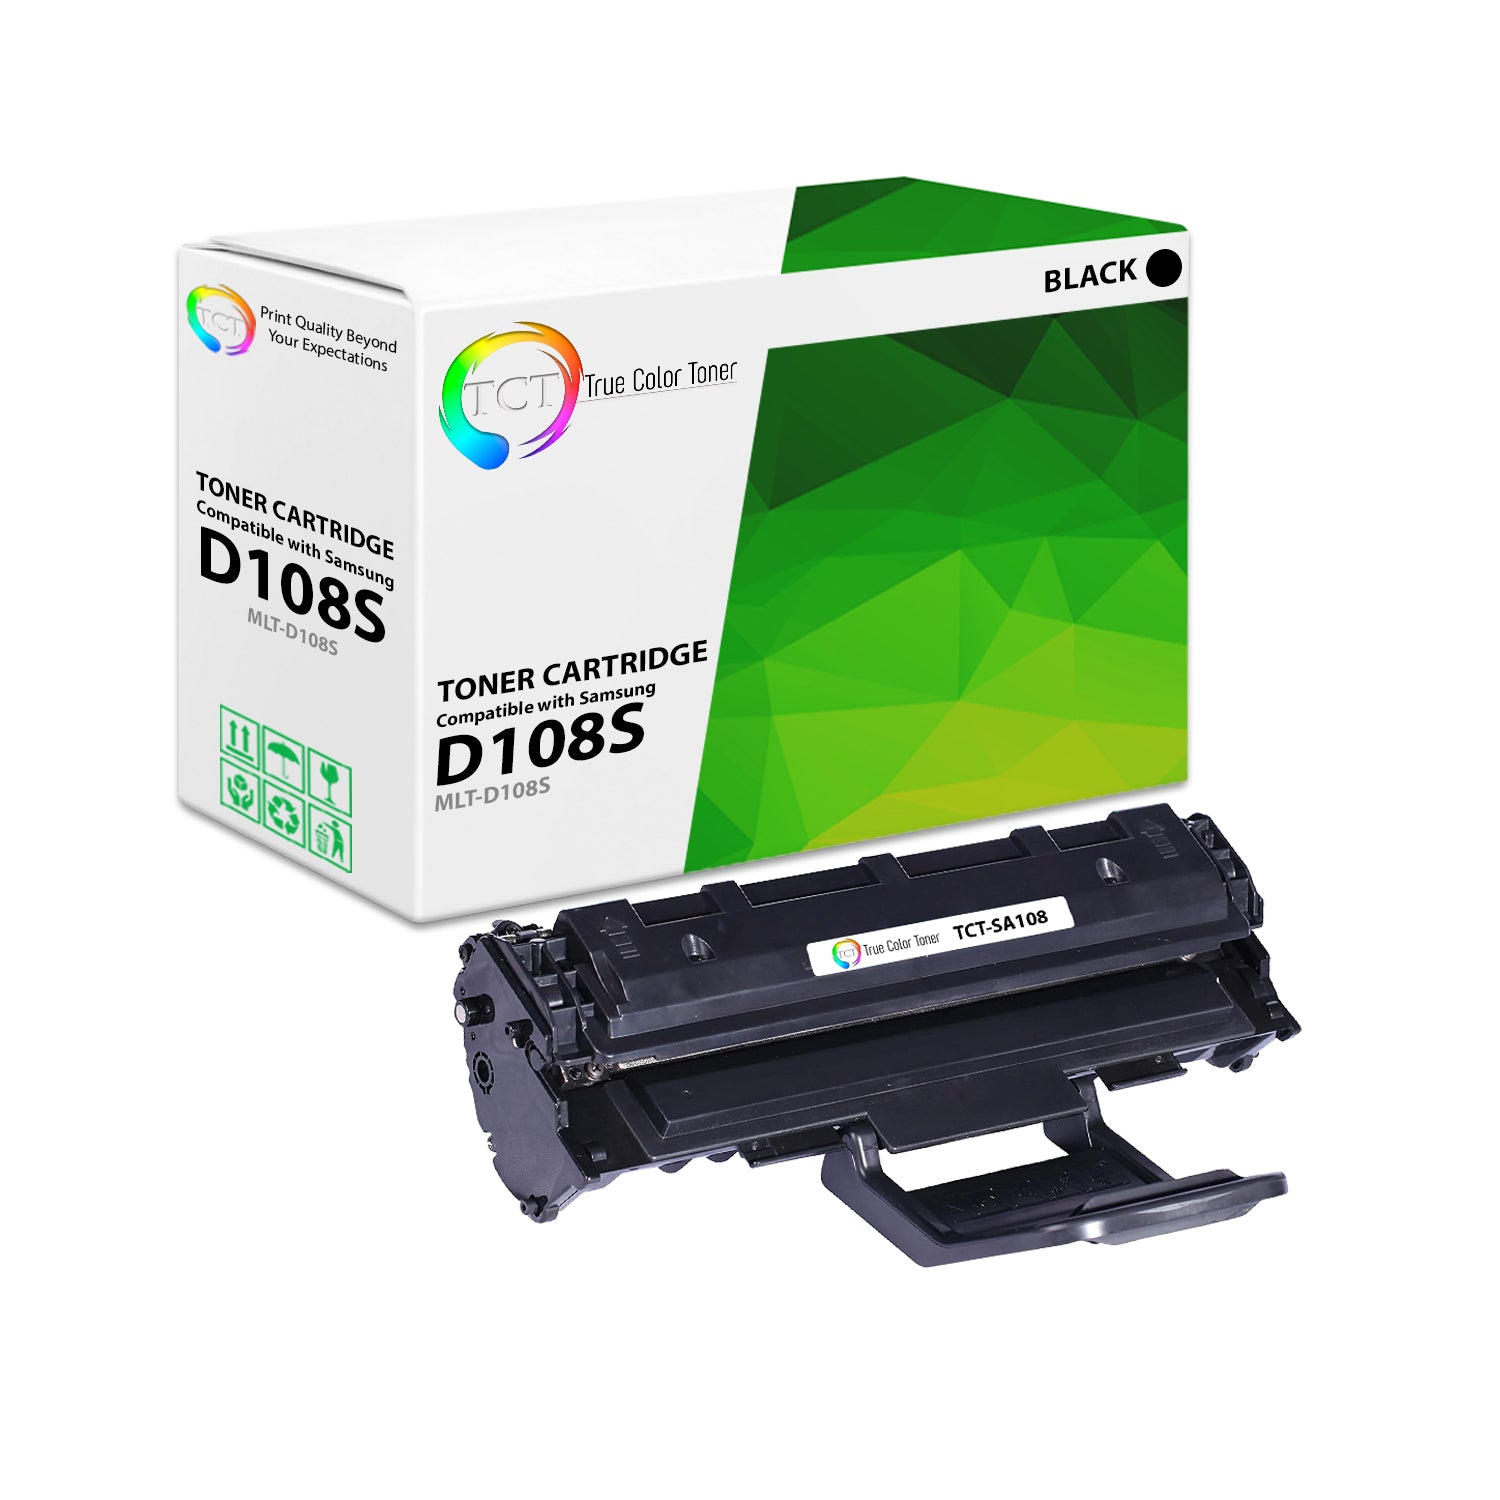 TCT Compatible Toner Cartridge Replacement for the Samsung MLTD108S Series - 1 Pack Black